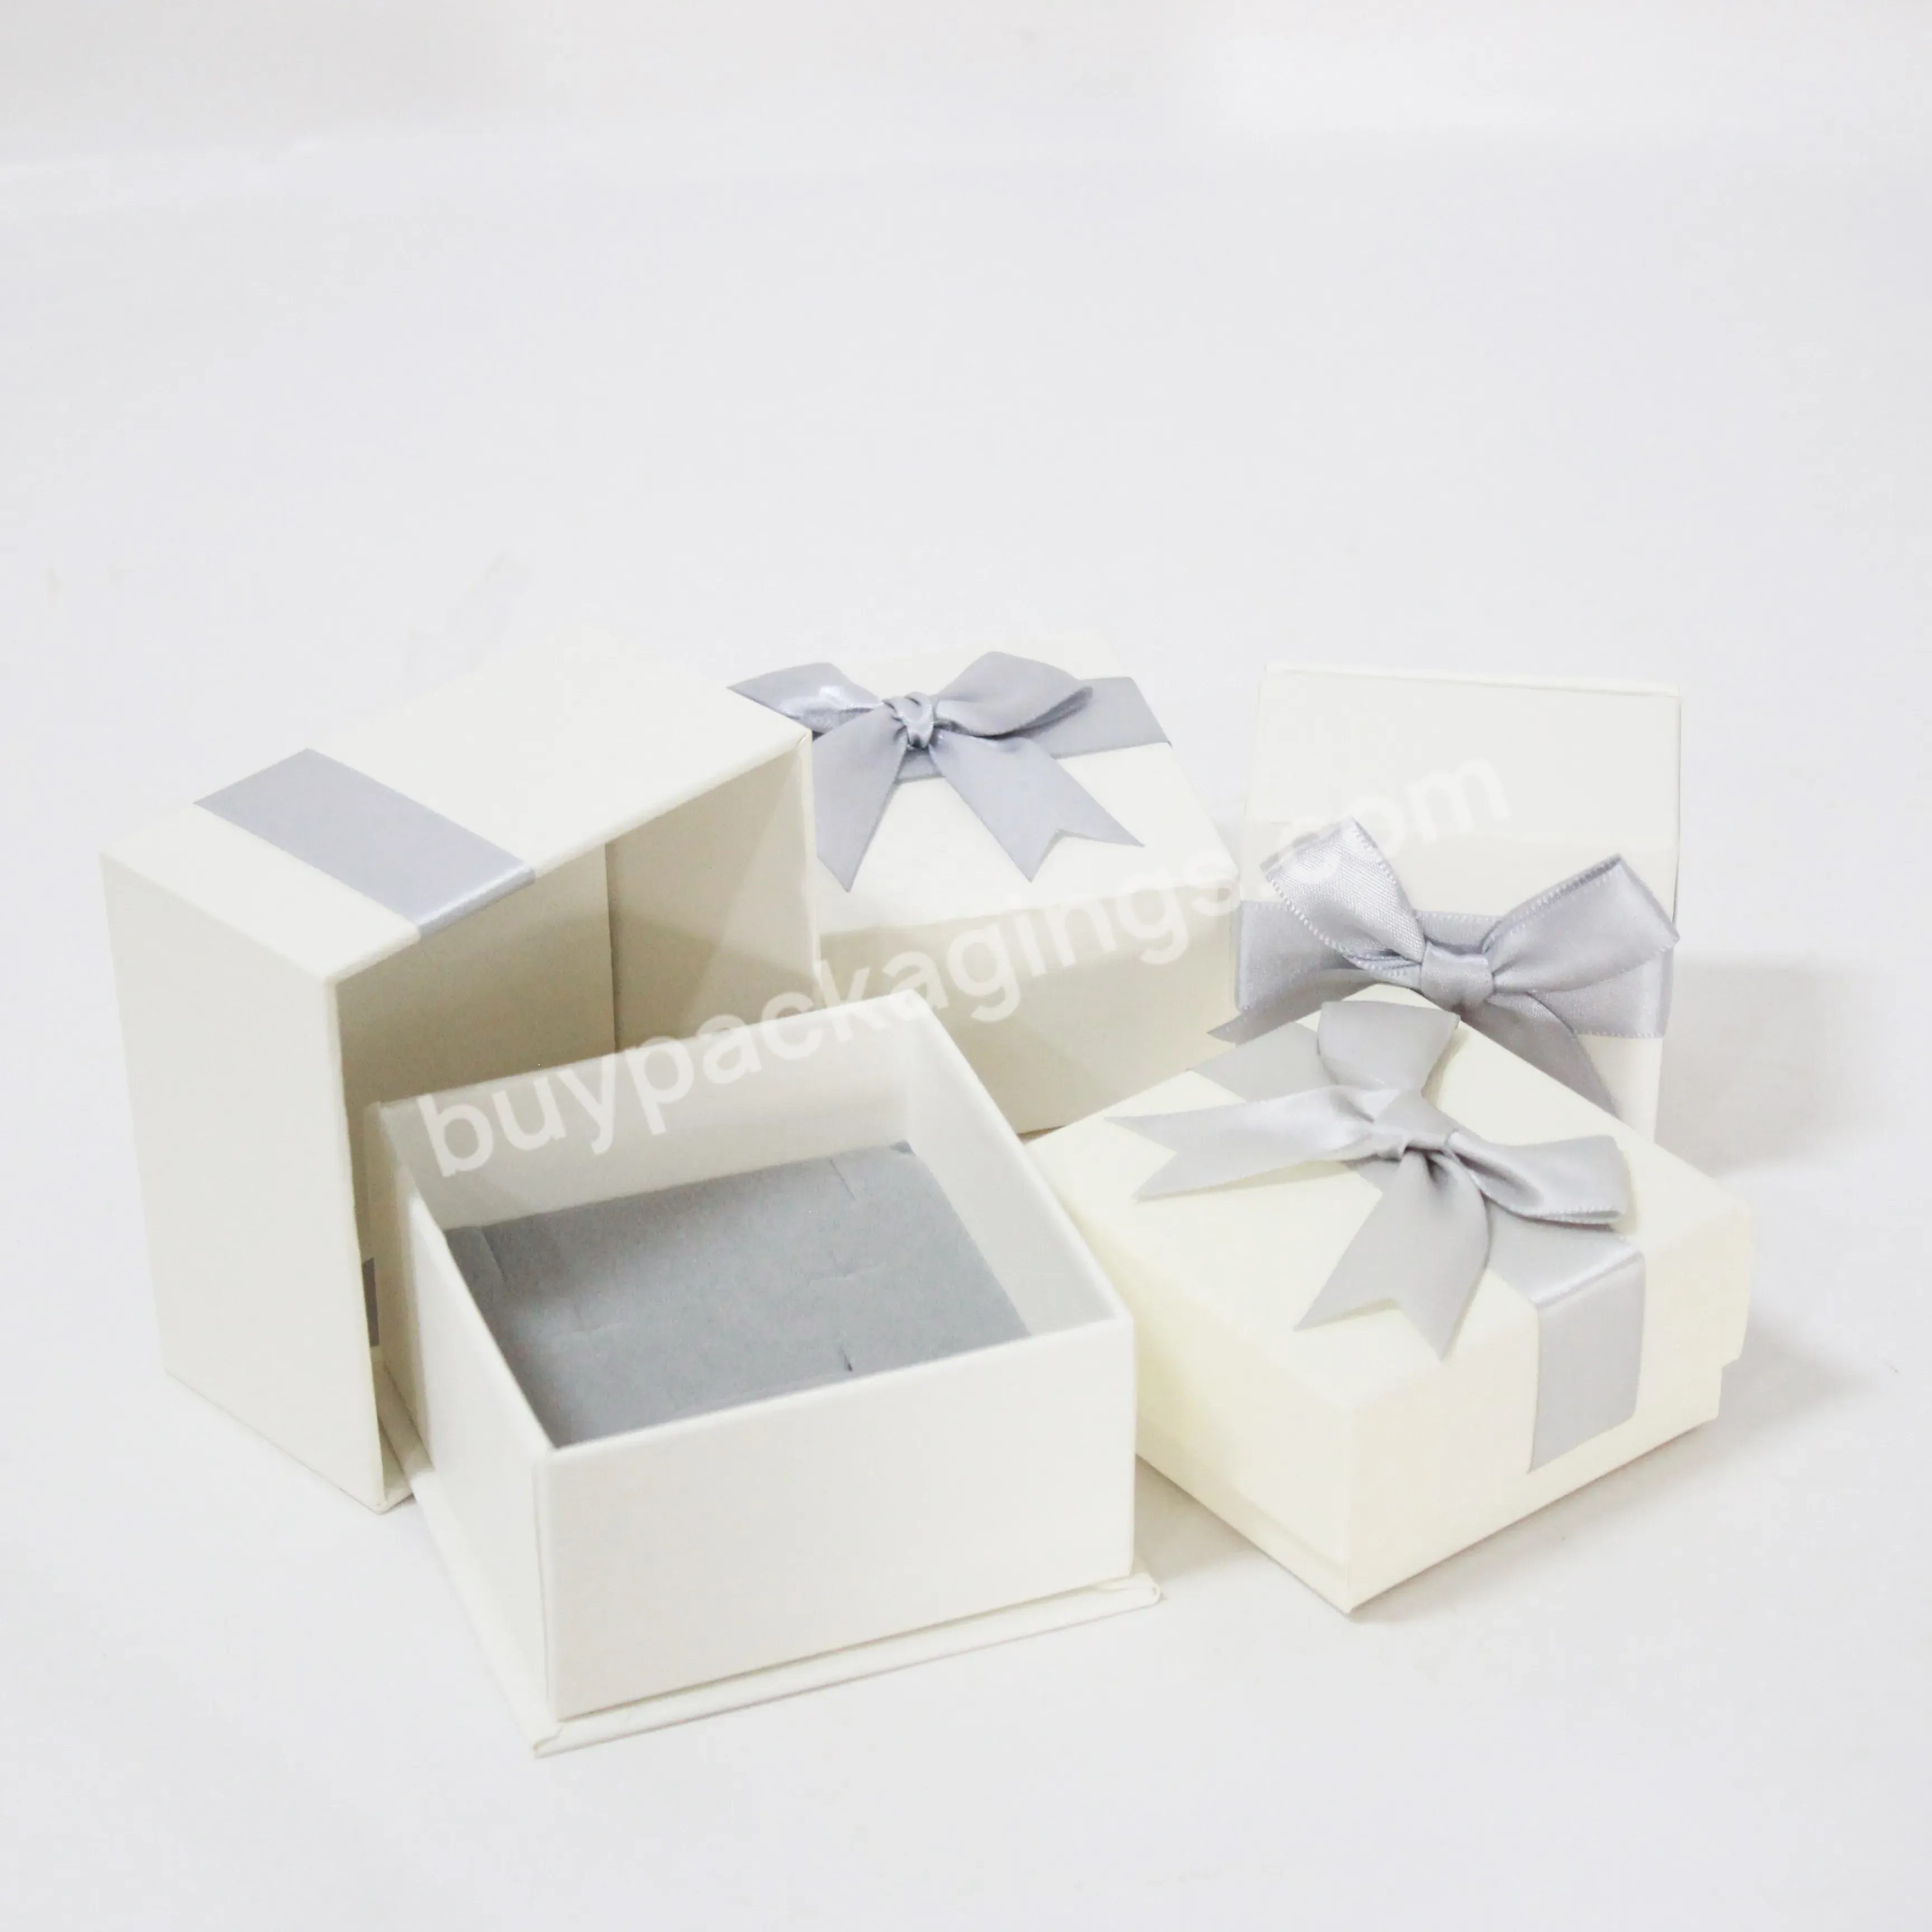 2021 Best-selling Custom Luxury Paper Velvet Jewelry Box Gift Packaging Boxes Necklace Box With Insert - Buy Jewelry Box,Boxes For Jewelry,Jewelry Packaging Box.